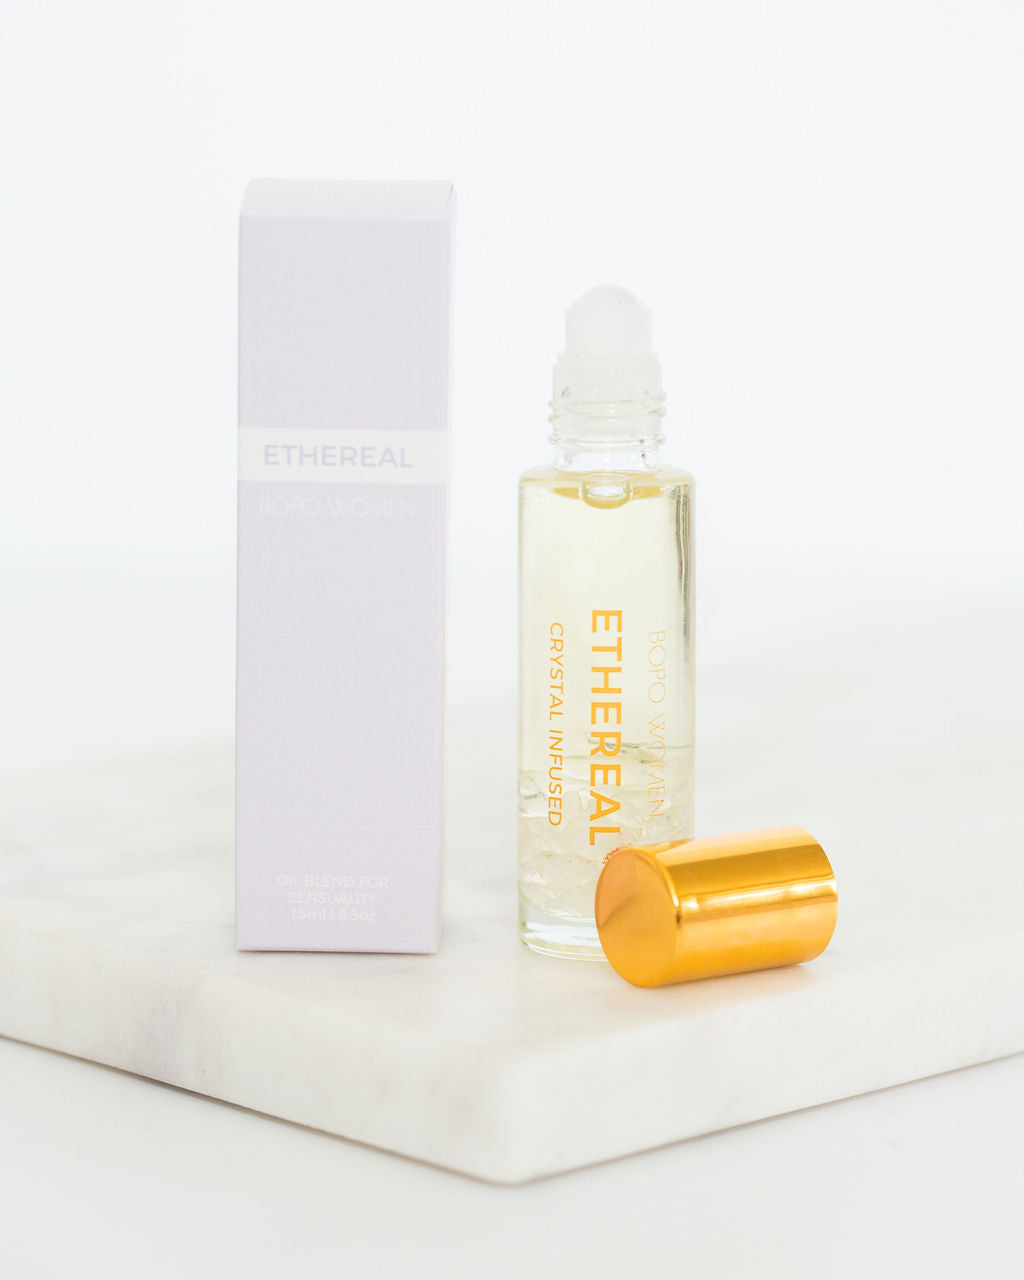 Crystal Perfume Oil Roller Set- Ethereal